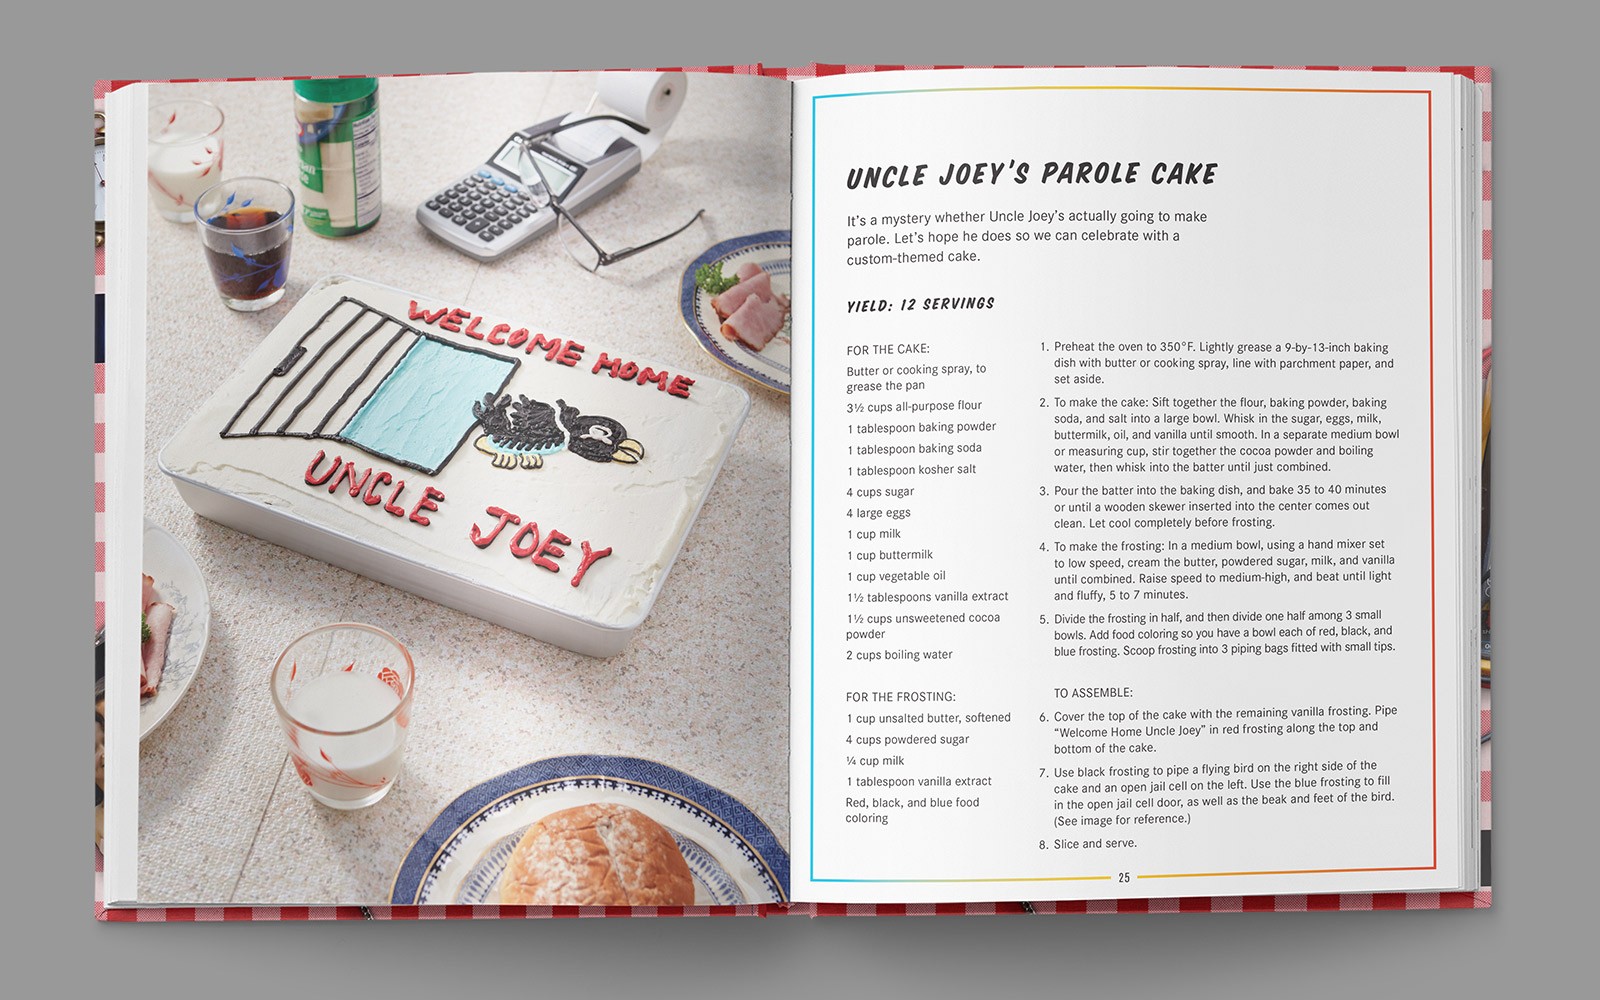 Back to the Future: The Official Hill Valley Cookbook- Prototype Shown